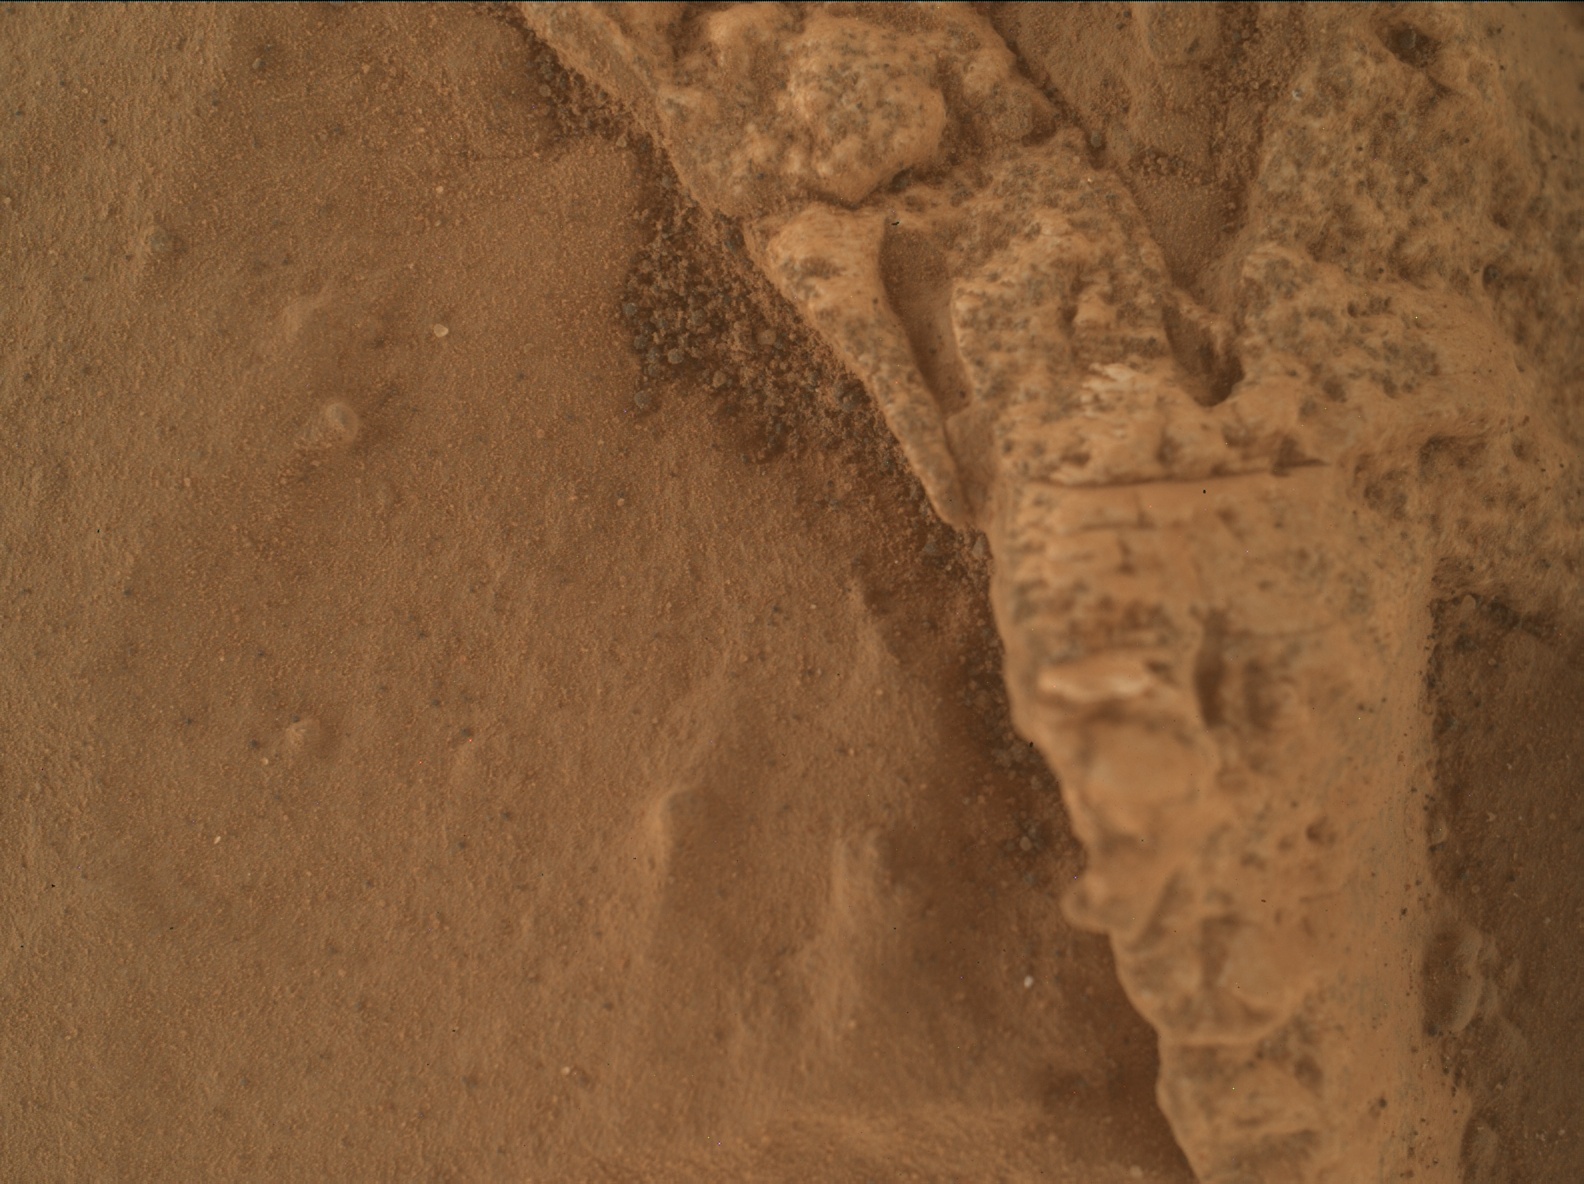 Nasa's Mars rover Curiosity acquired this image using its Mars Hand Lens Imager (MAHLI) on Sol 3117